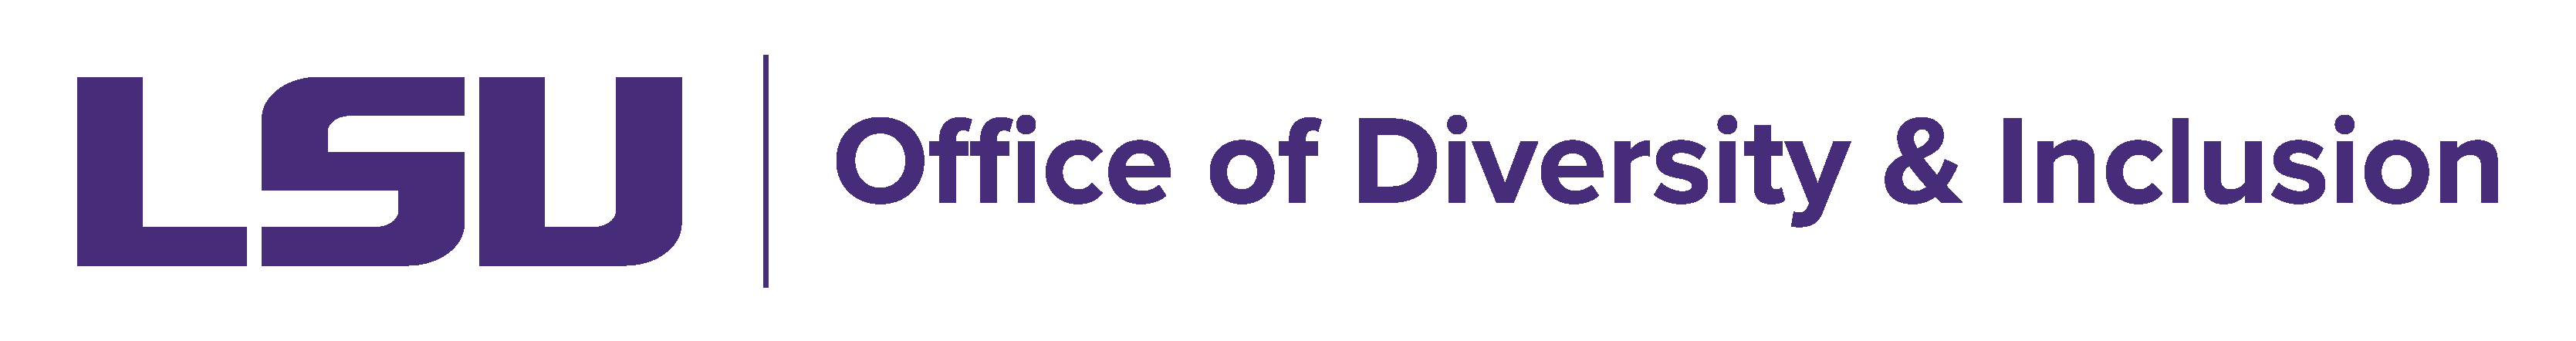 Office of Diversity and Inclusion logo